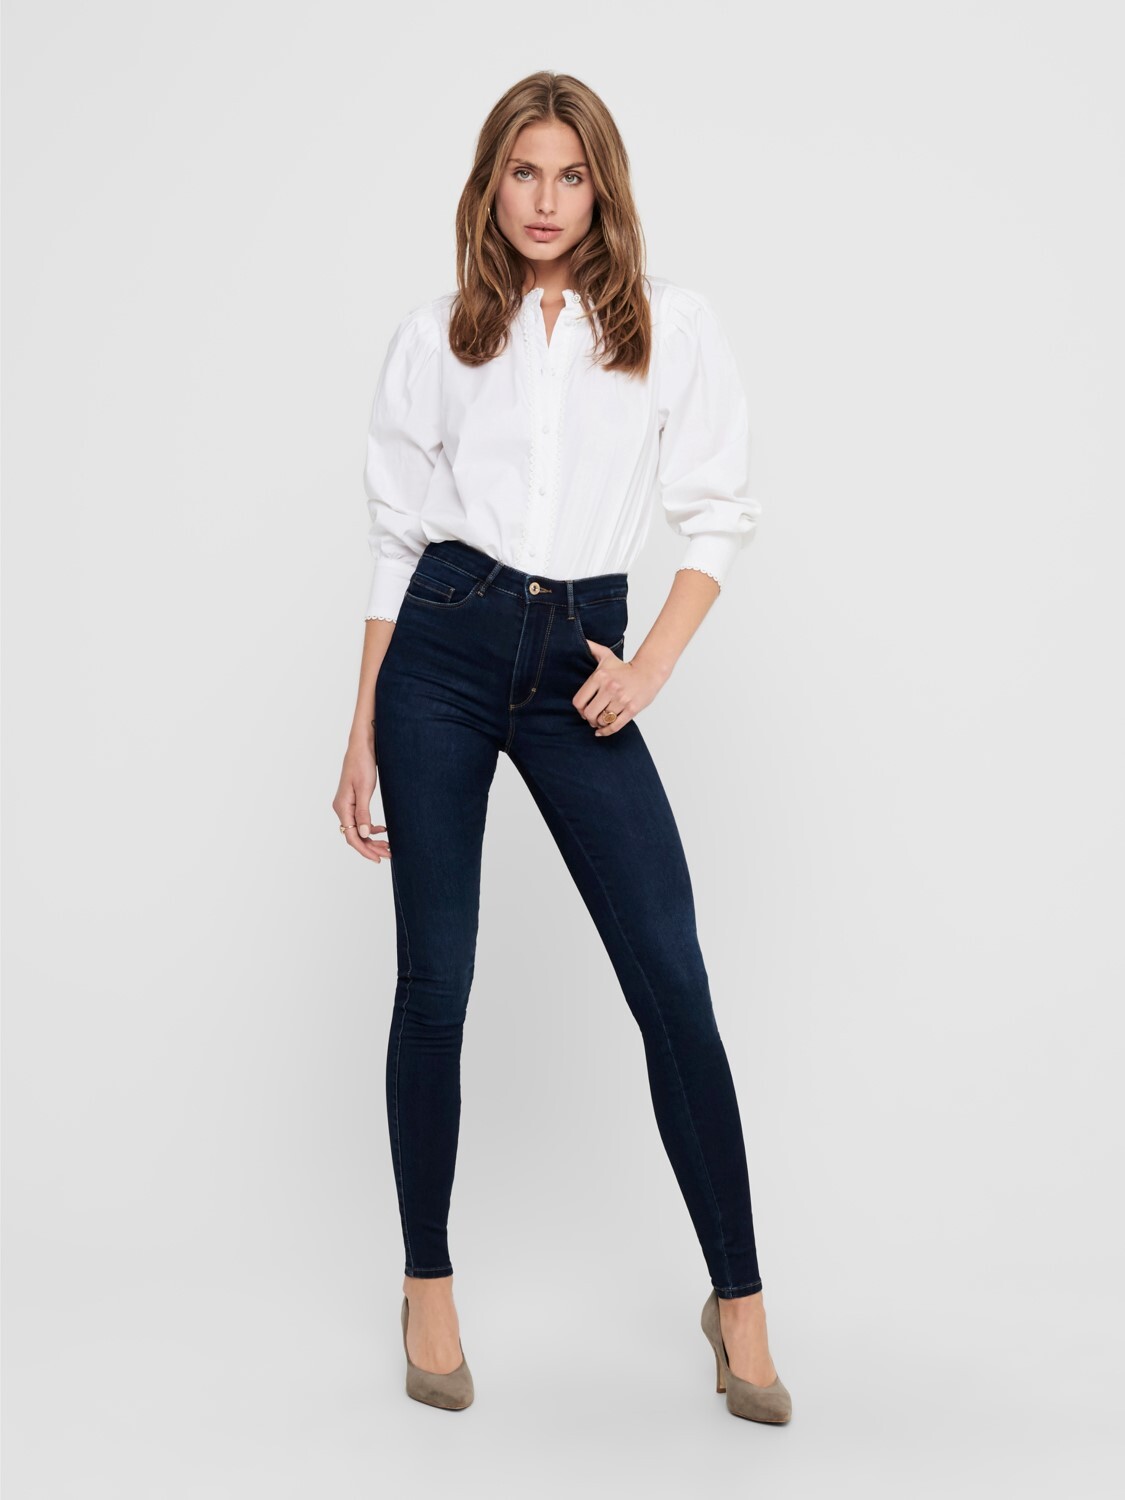 Ligatie Goed opgeleid Beweren Only Royal high jeans Only - Dames kleding | Albers Mode By Daphne Raalte